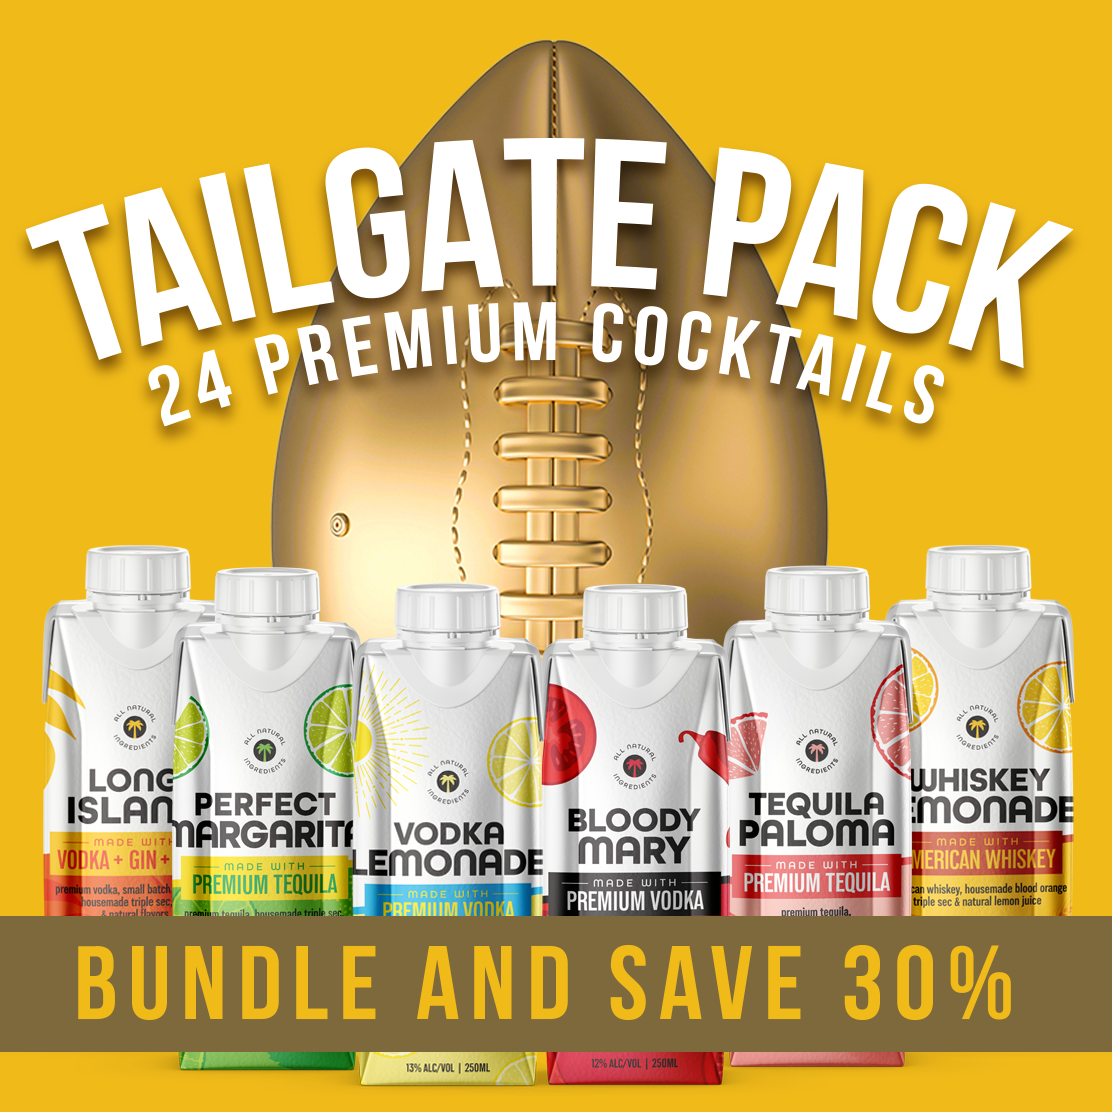 tailgate pack